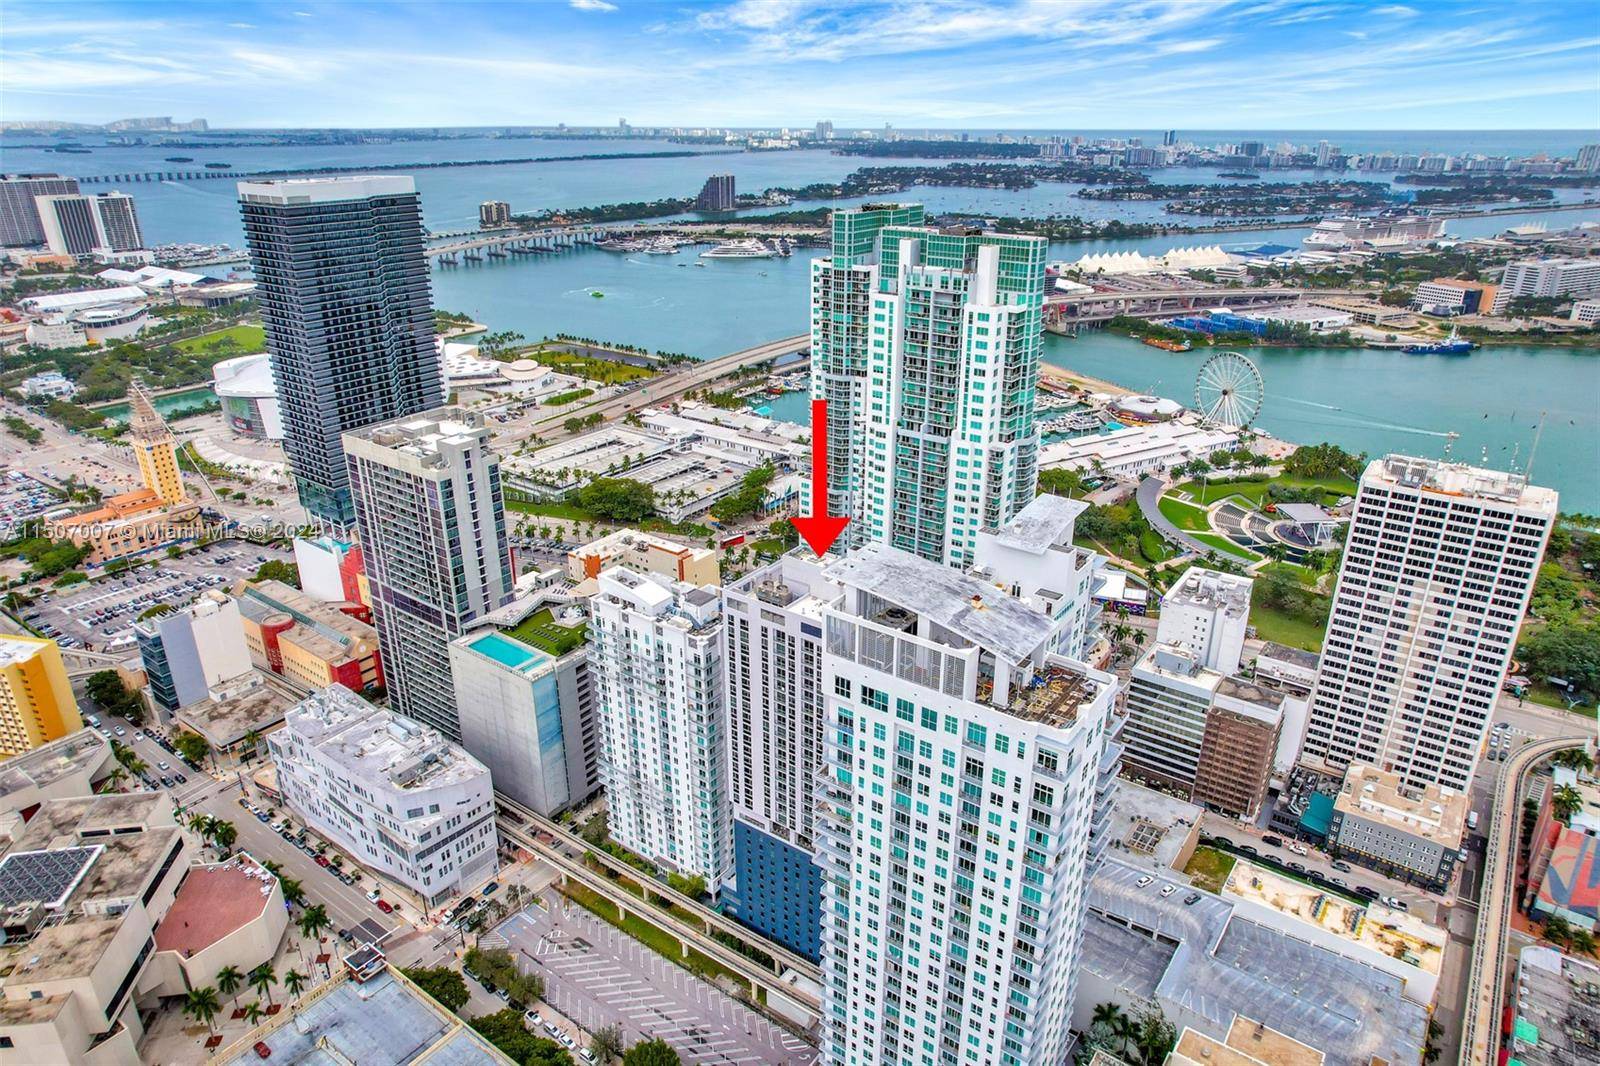 One of the best condo hotel in downtown Miami area.